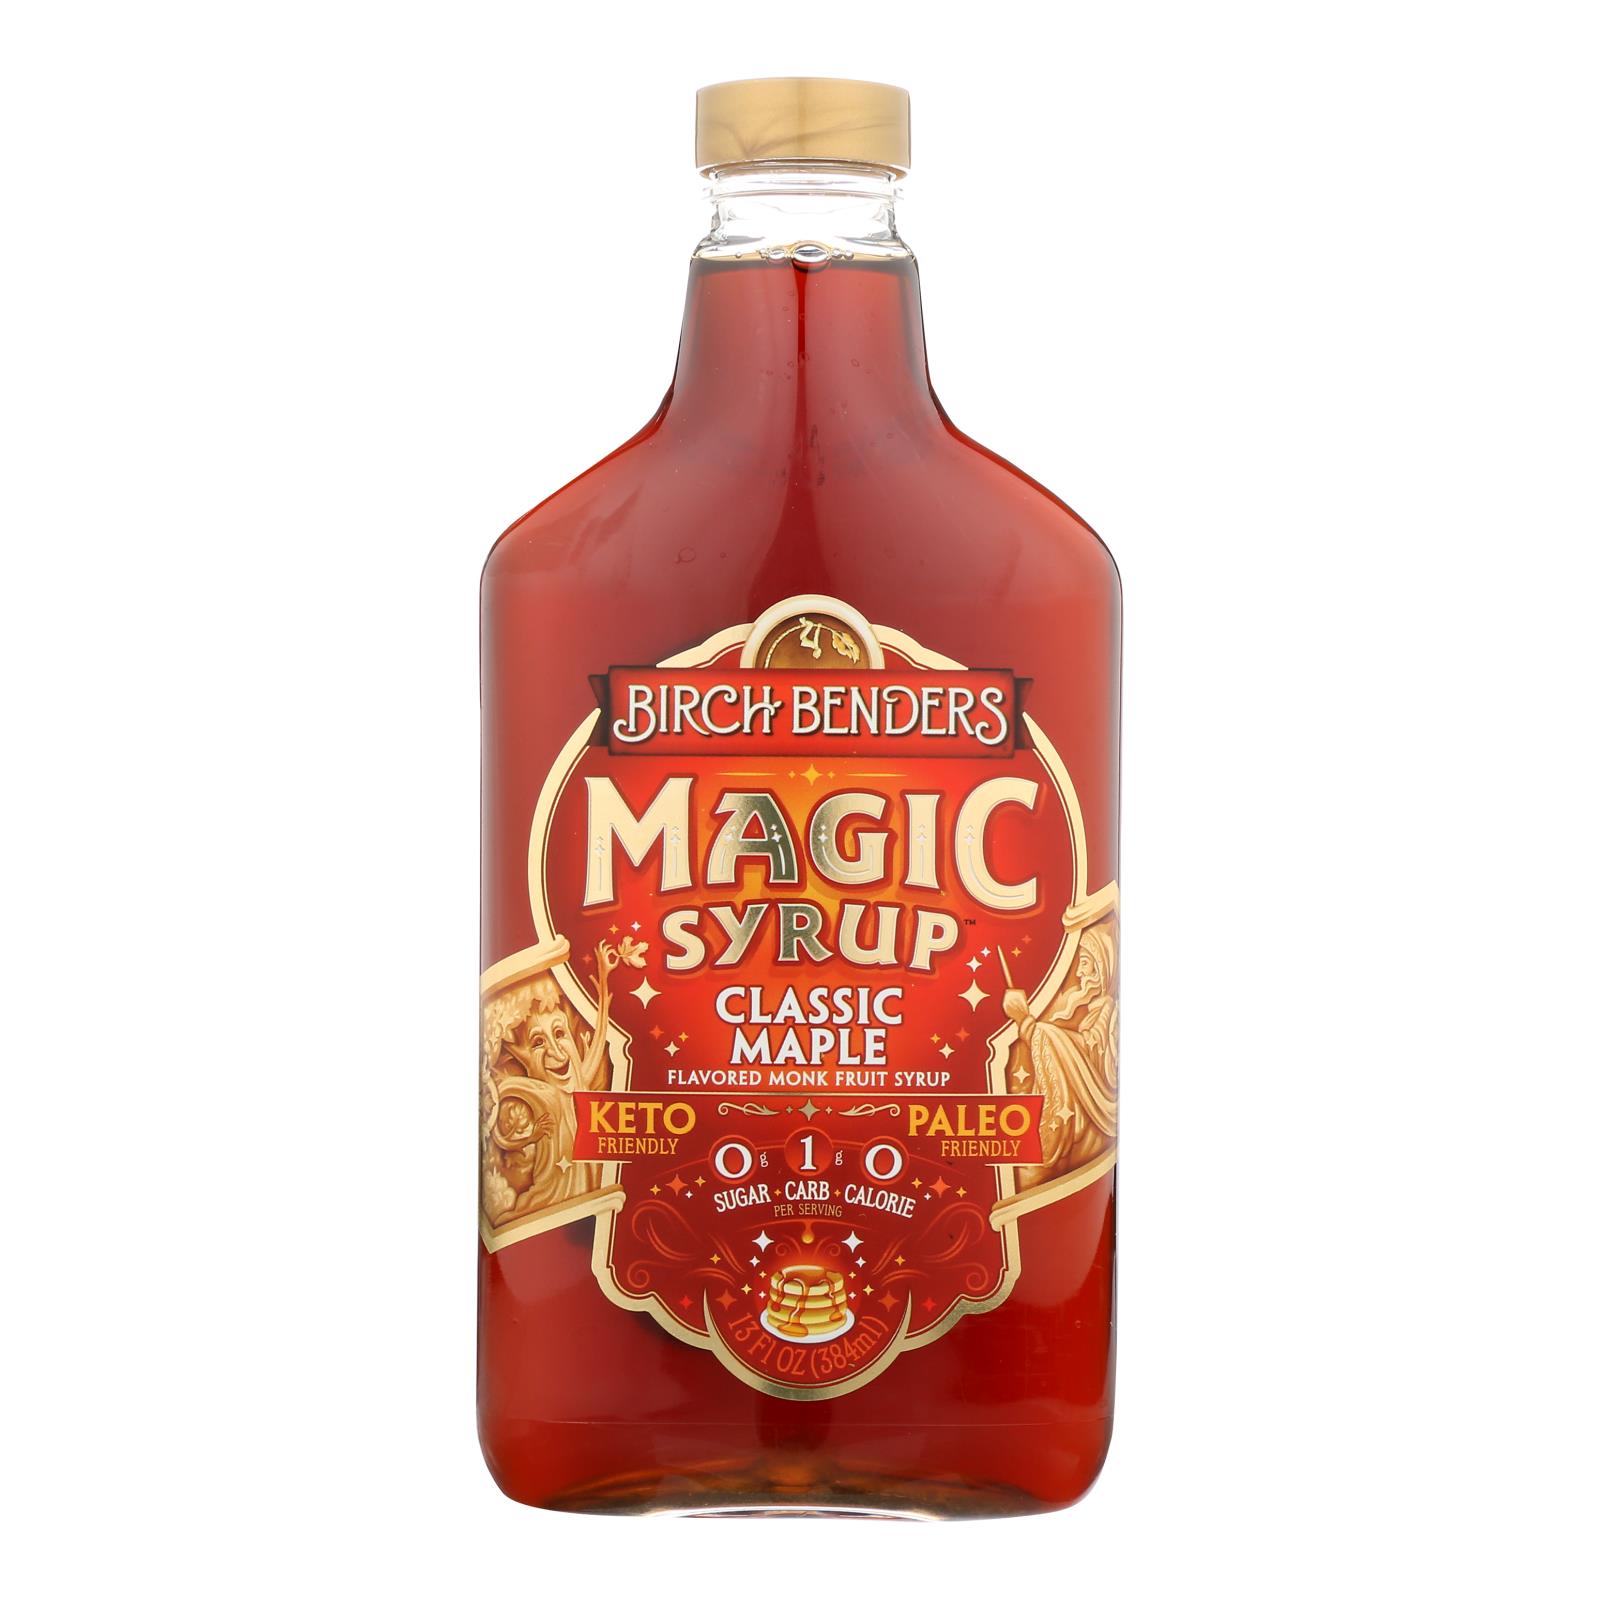 Birch Benders - Syrup Magic Maple - Case of 6 - 13 FZ